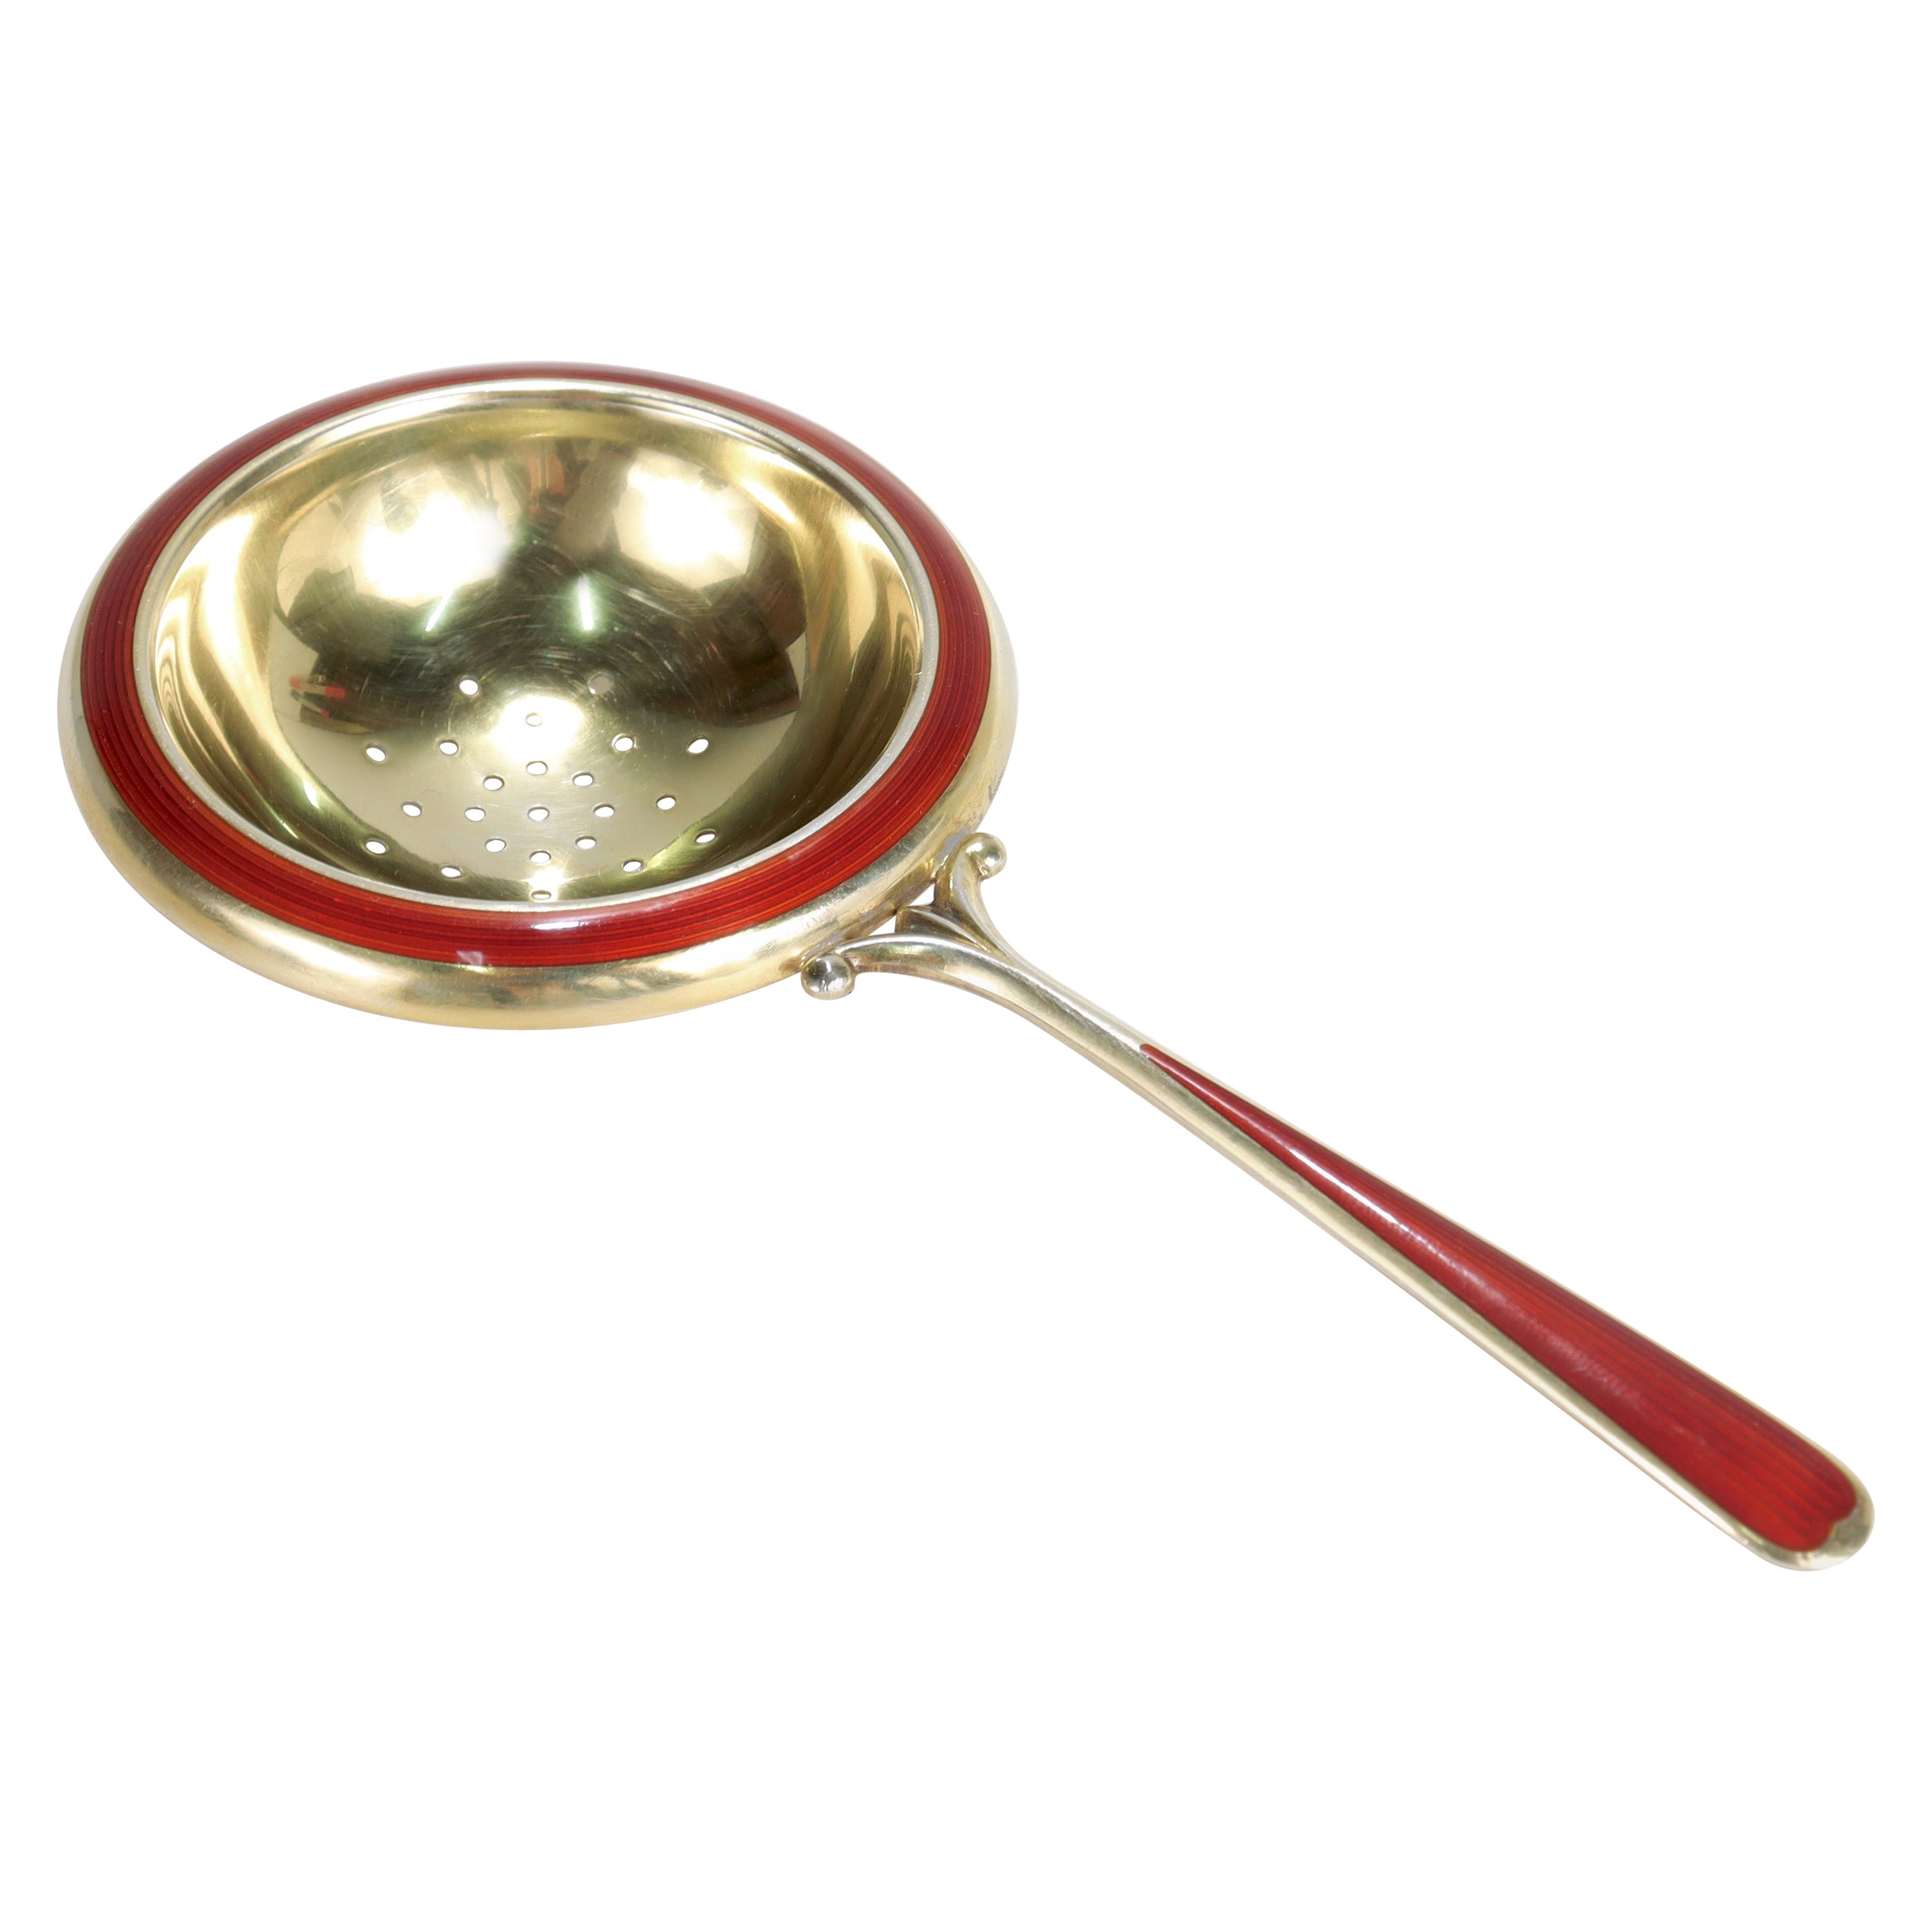 Antique Art Deco Red Enamel & Gilt Sterling Silver Tea Strainer by N.M. Thune For Sale